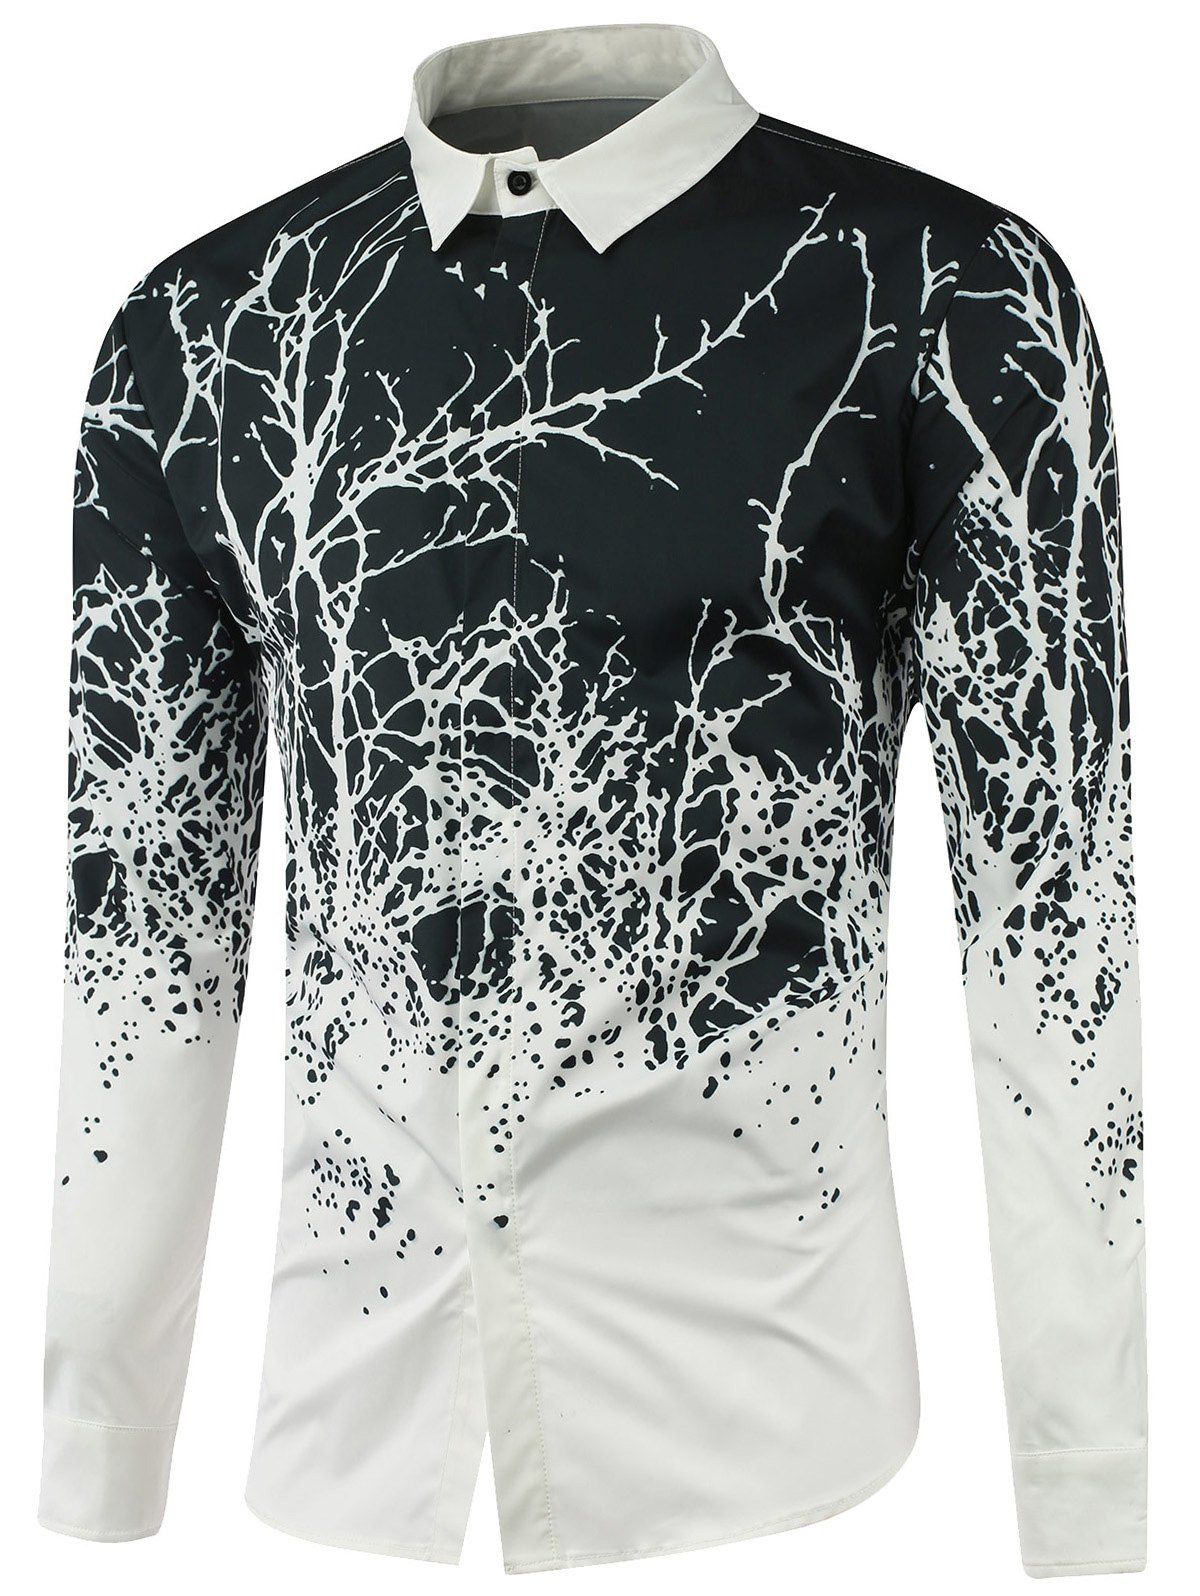 [17% OFF] 2020 Tree Branch Printed Long Sleeve Shirt In WHITE | DressLily